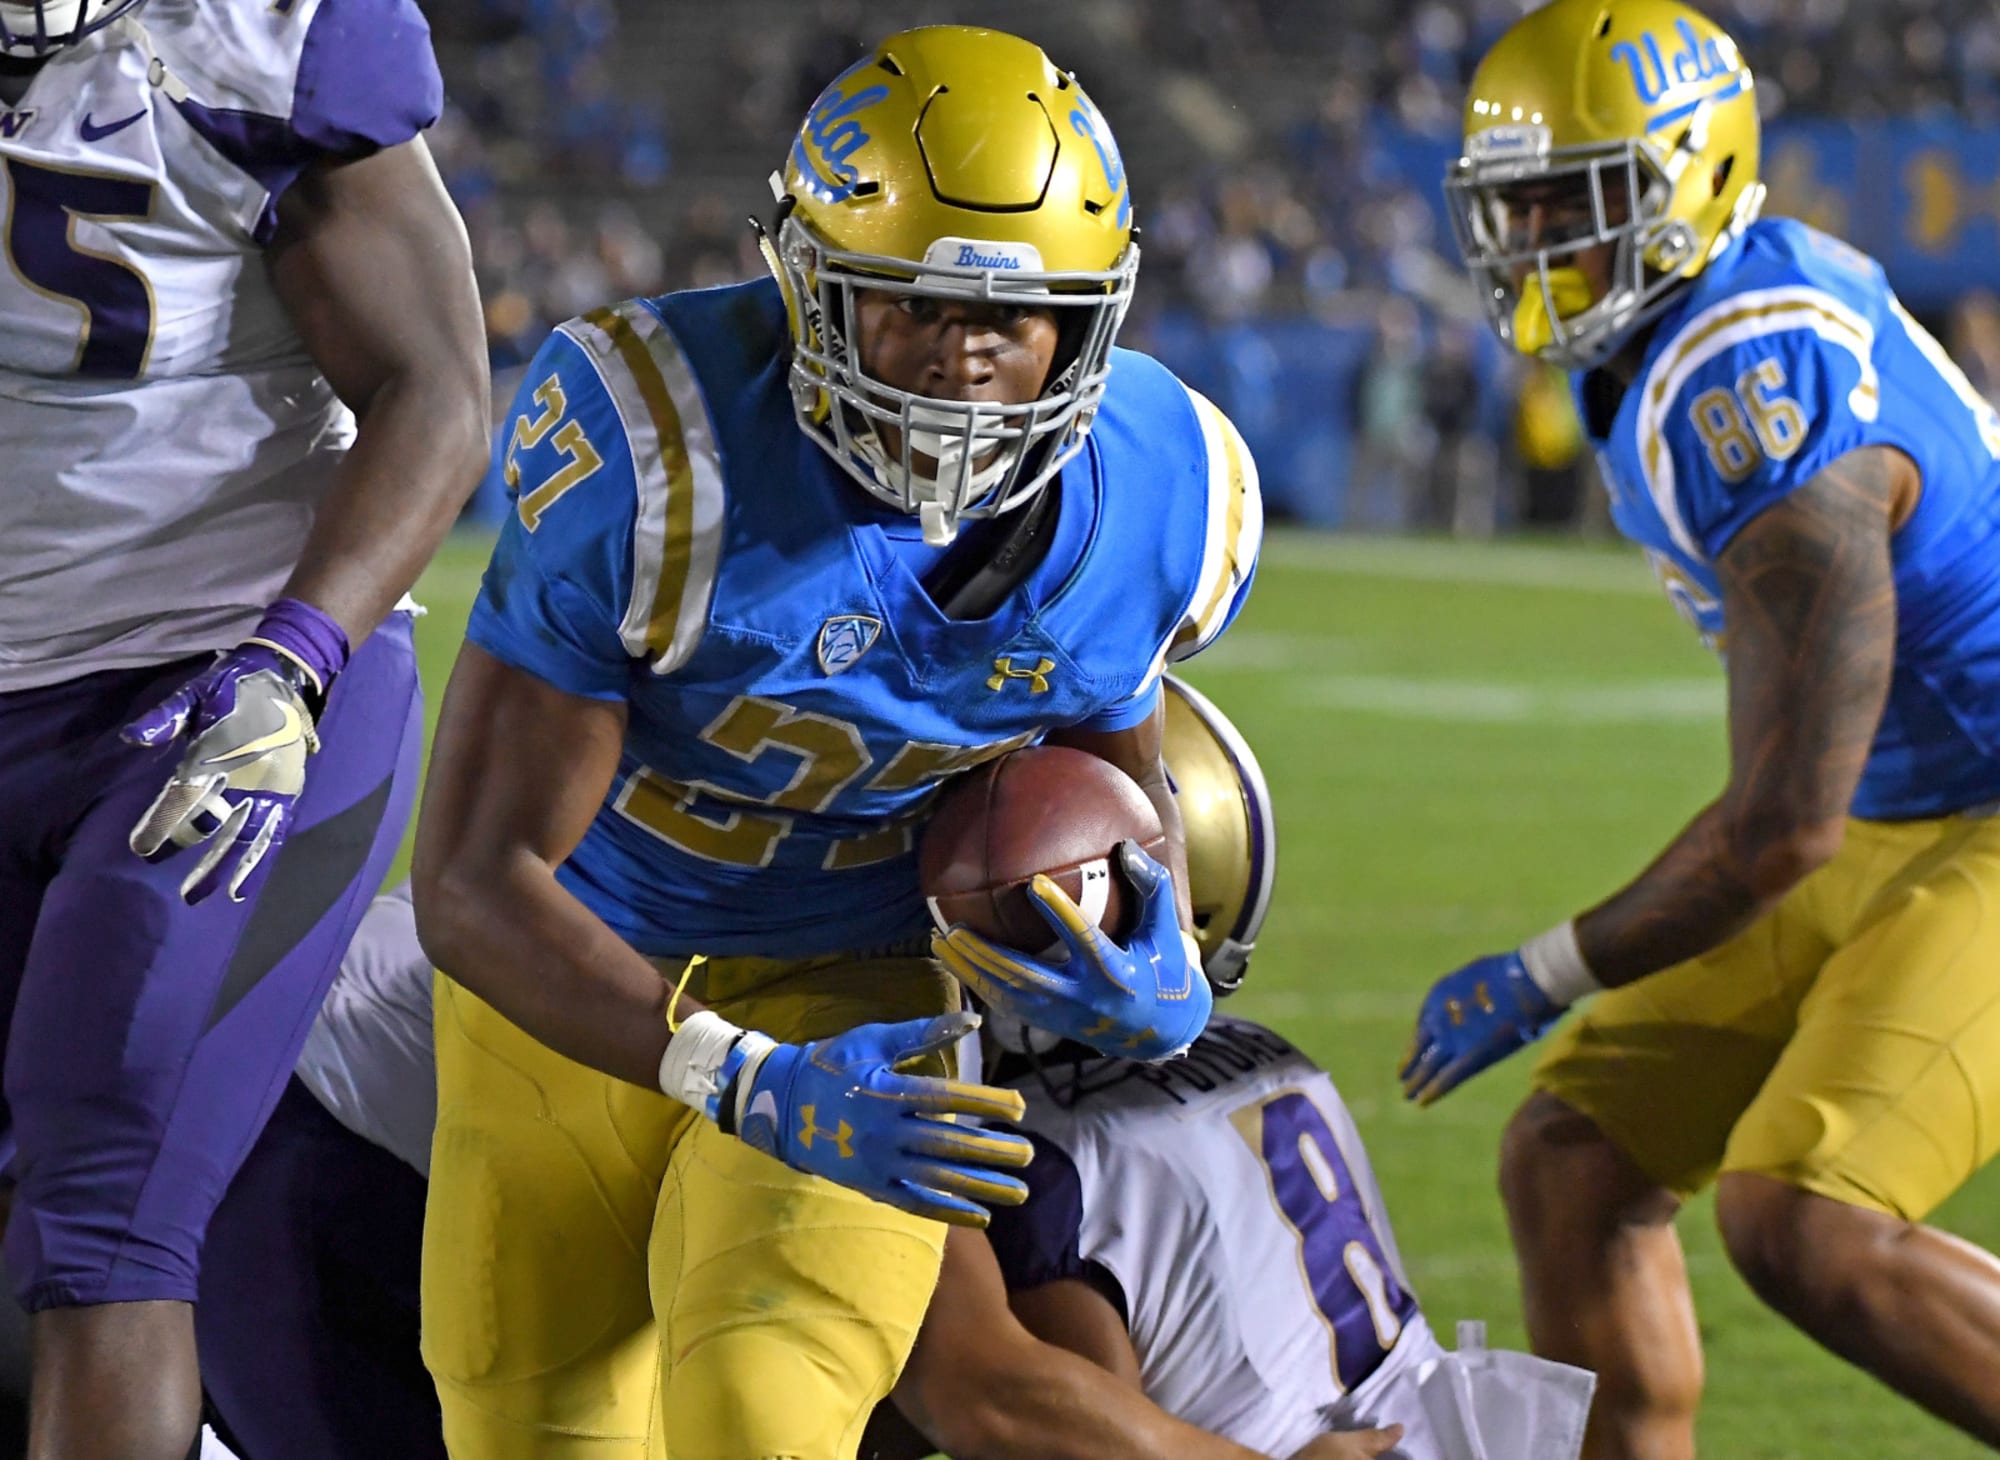 UCLA Spring Game 2019 live stream How to watch online